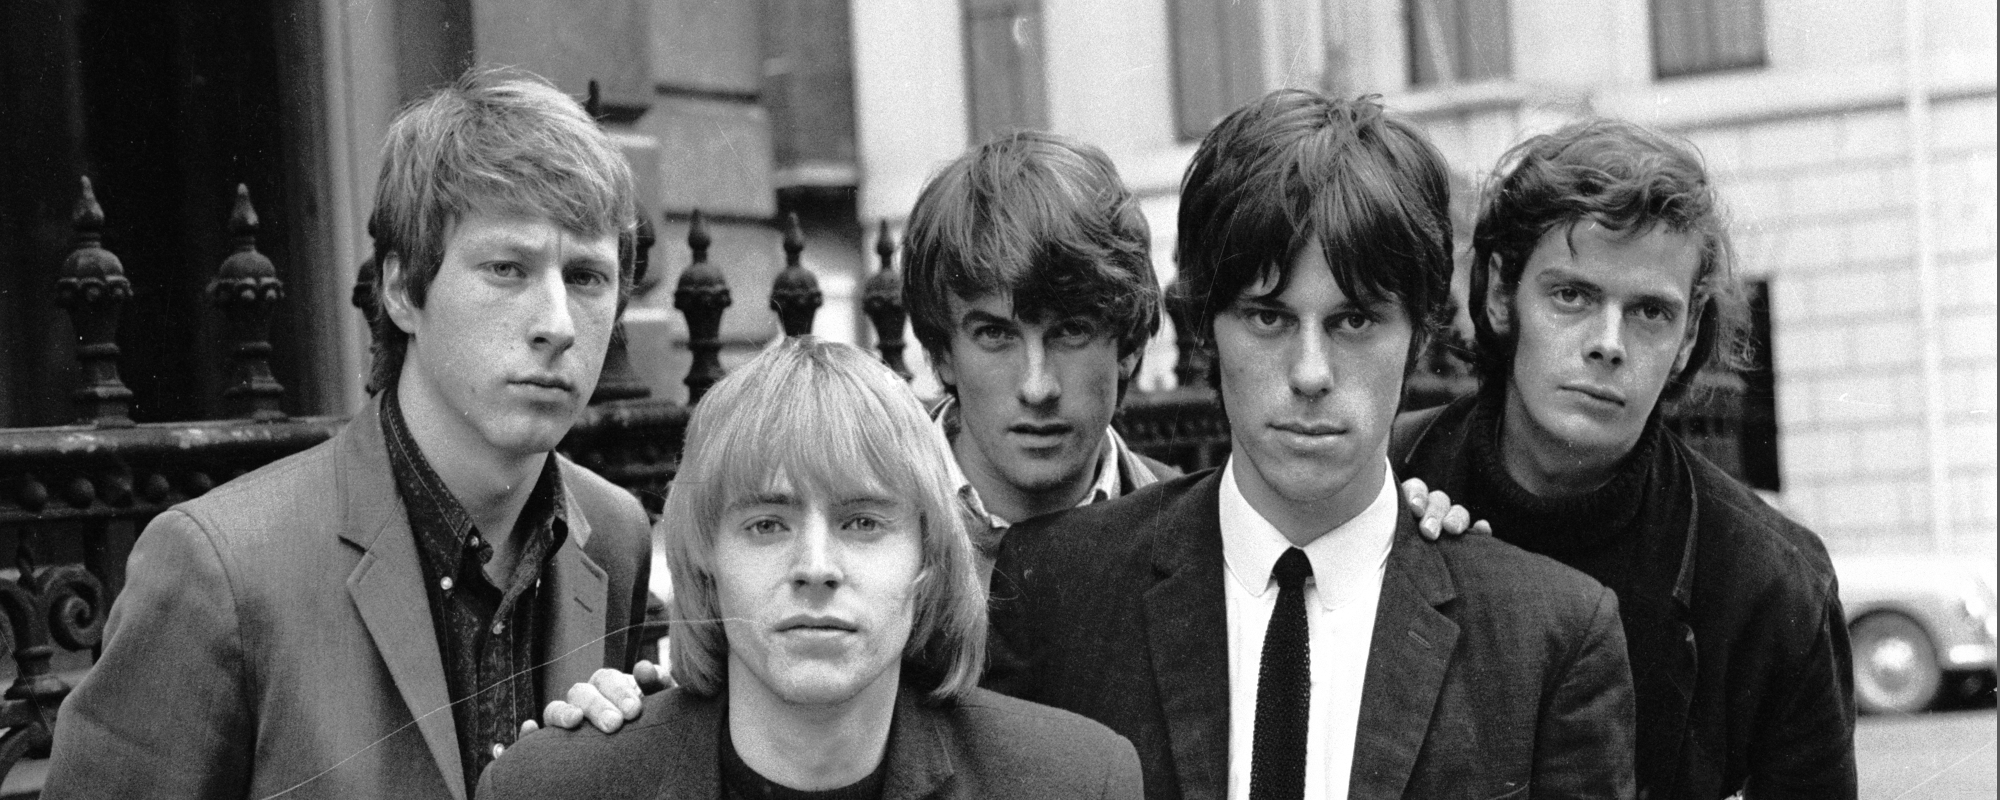 Behind the Band Name: The Yardbirds